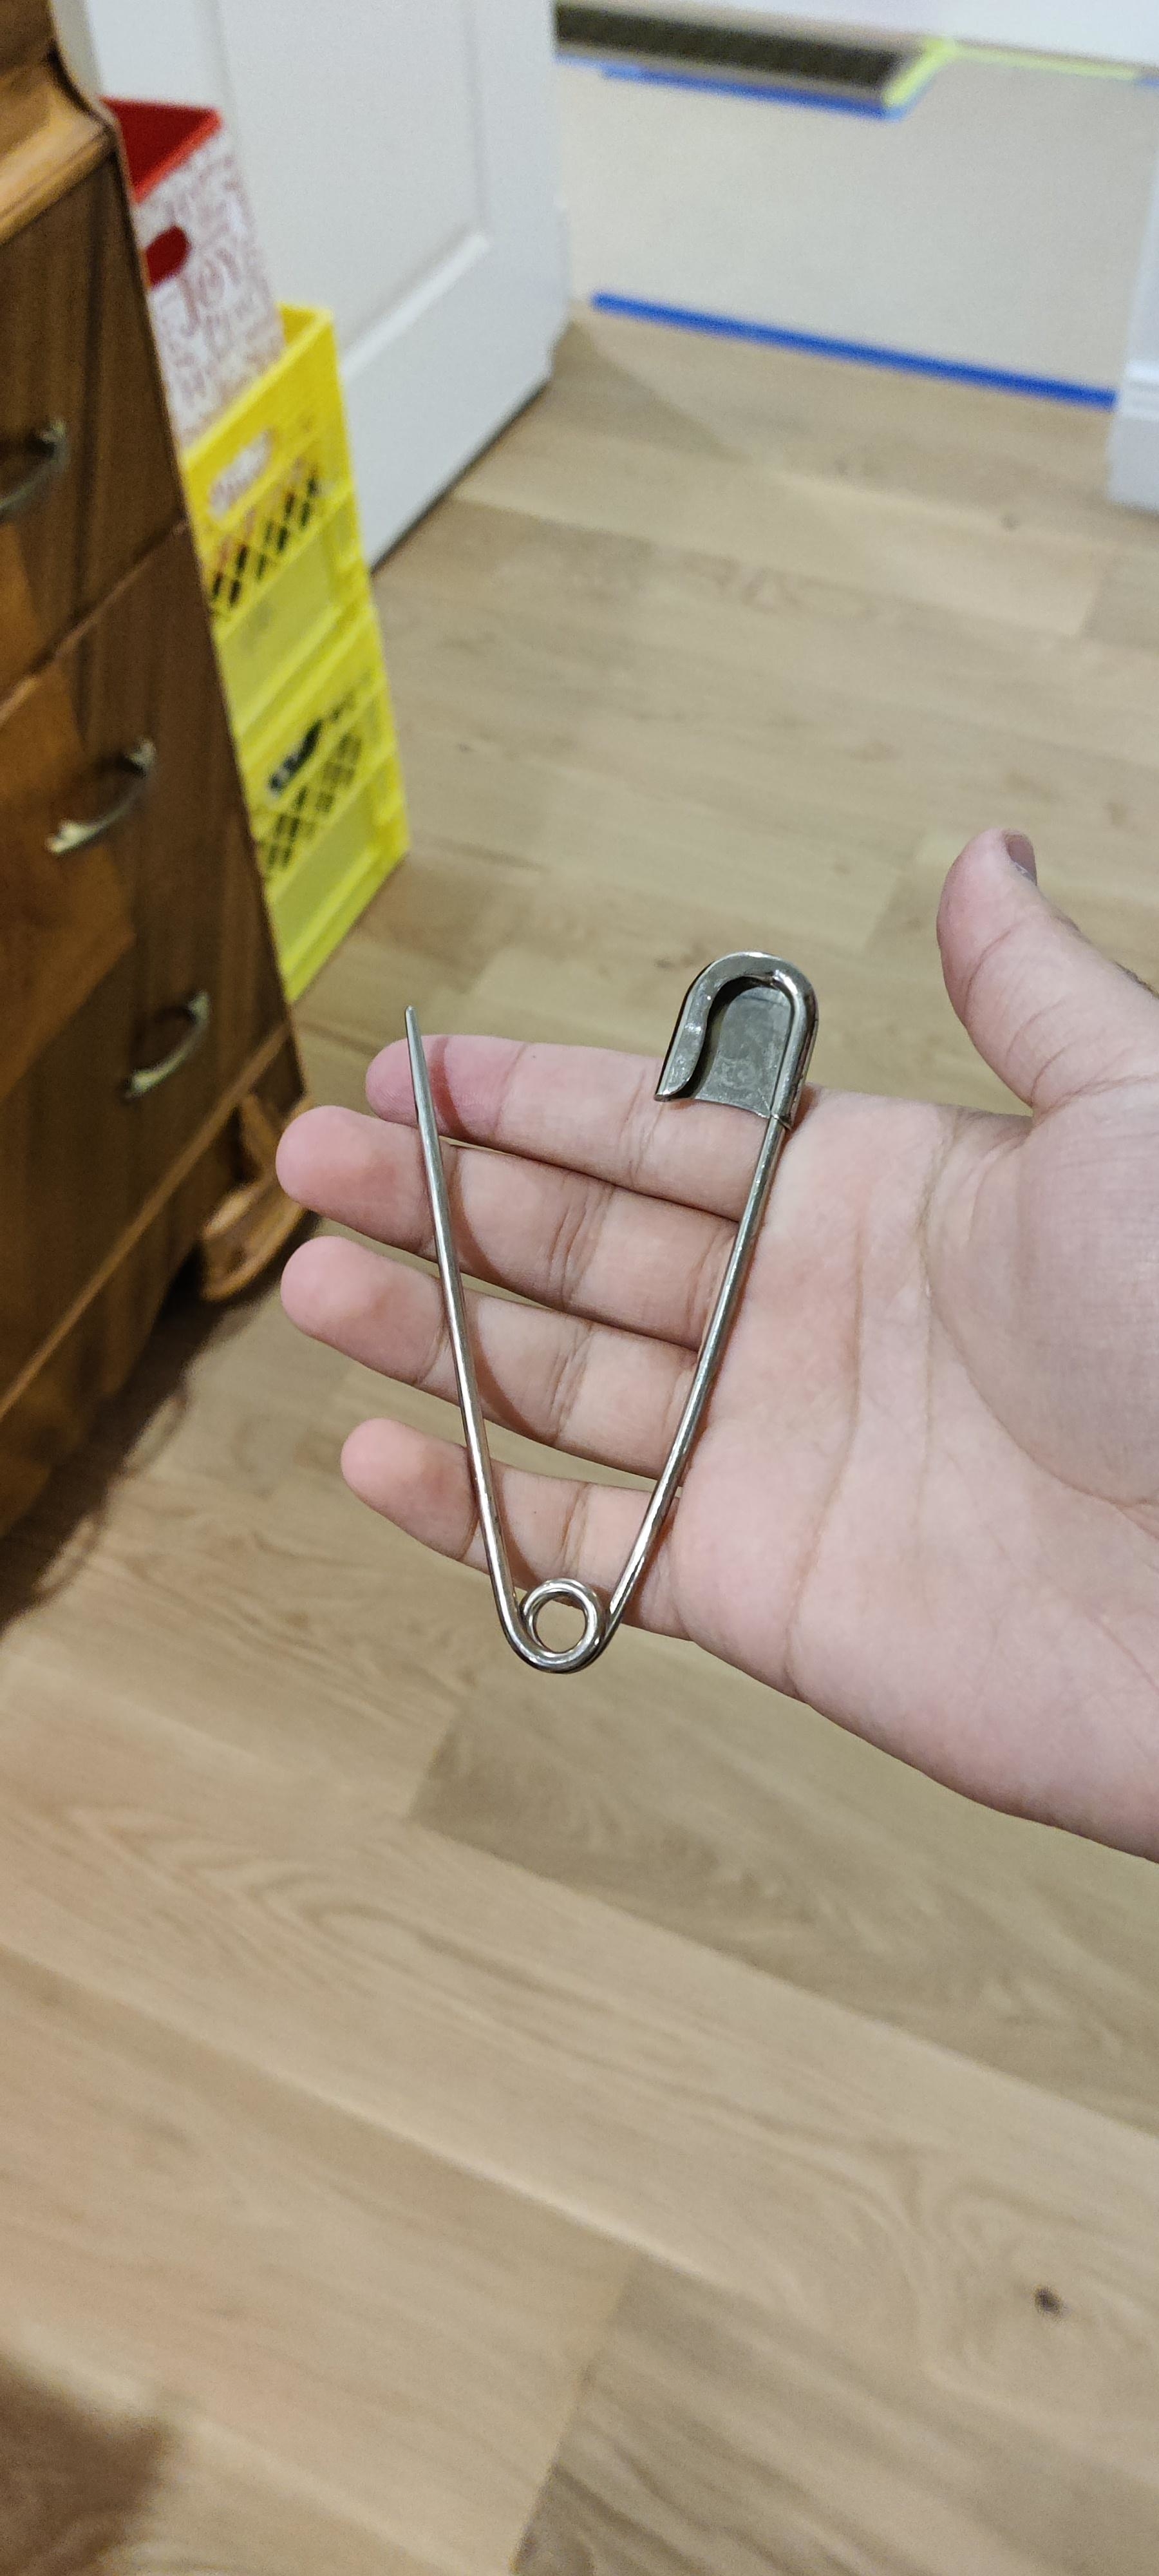 A person&#x27;s hand holding a large metal safety pin against a home interior background